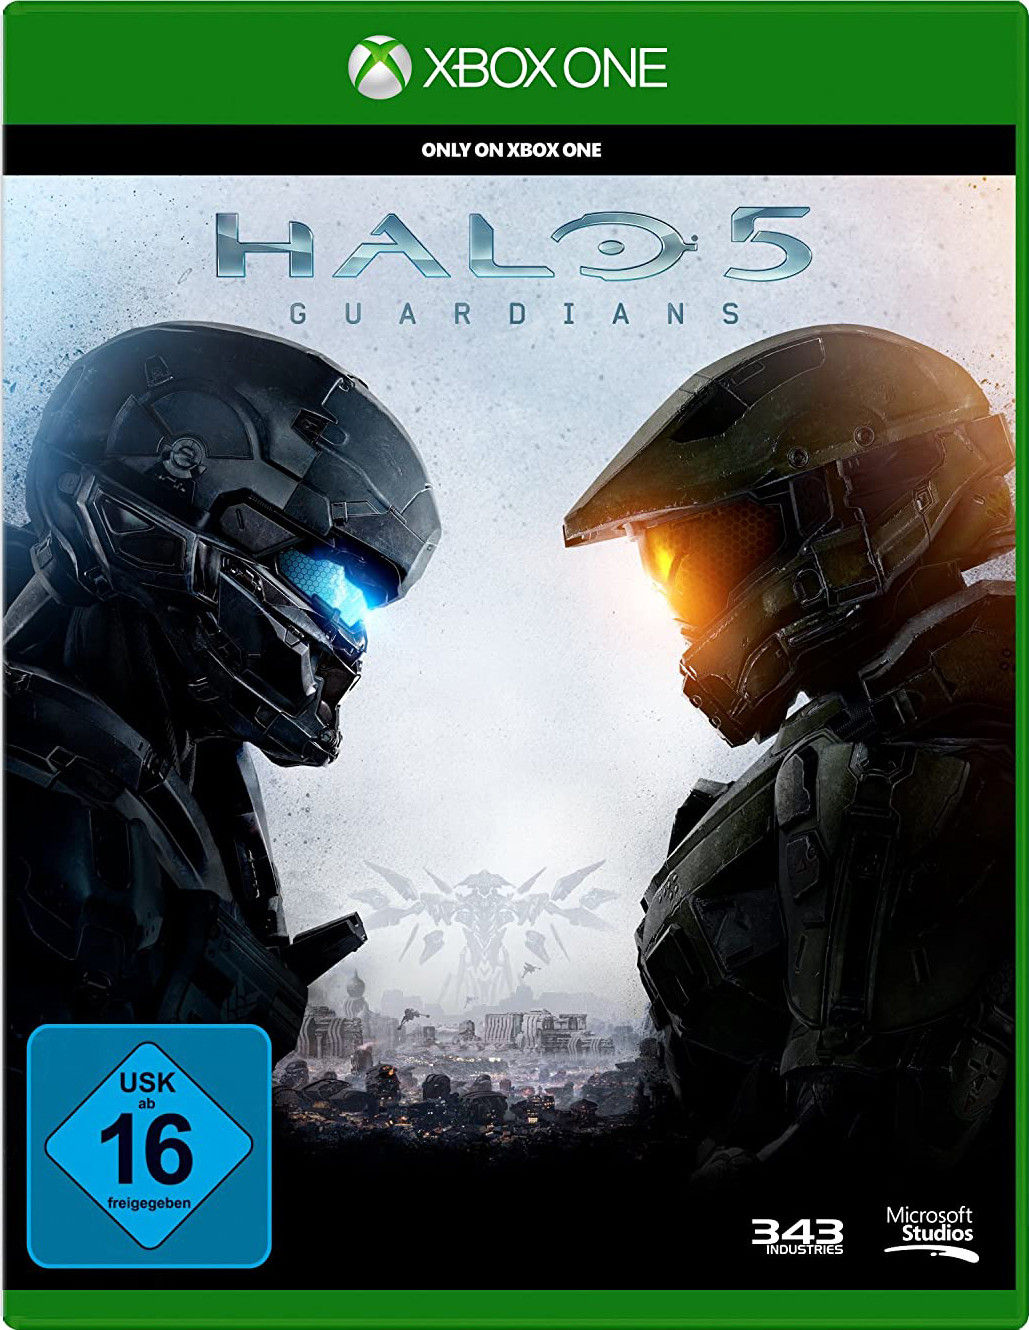 Halo 5 Guardians (verpakking Duits, game Engels) Xbox One